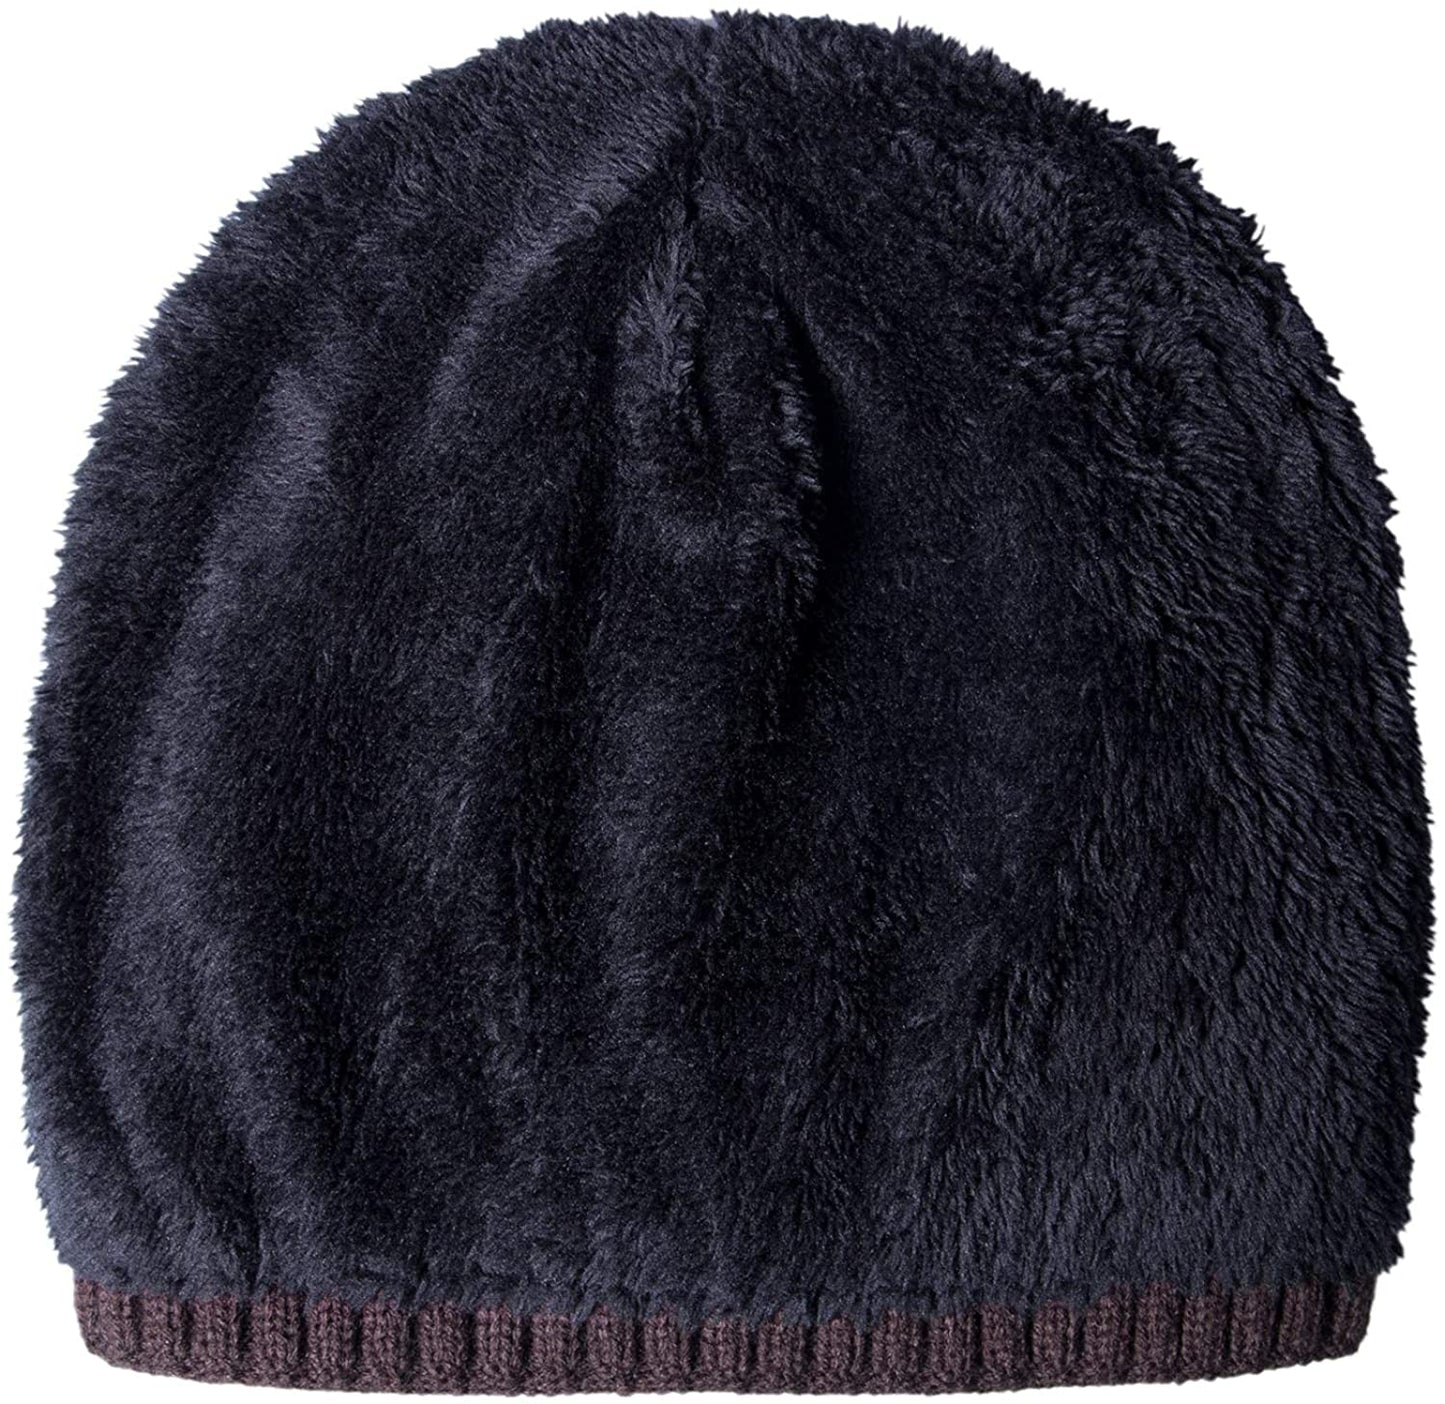 Winter Warm Knitted Wool Thick Baggy Slouchy Beanie Skull Cap